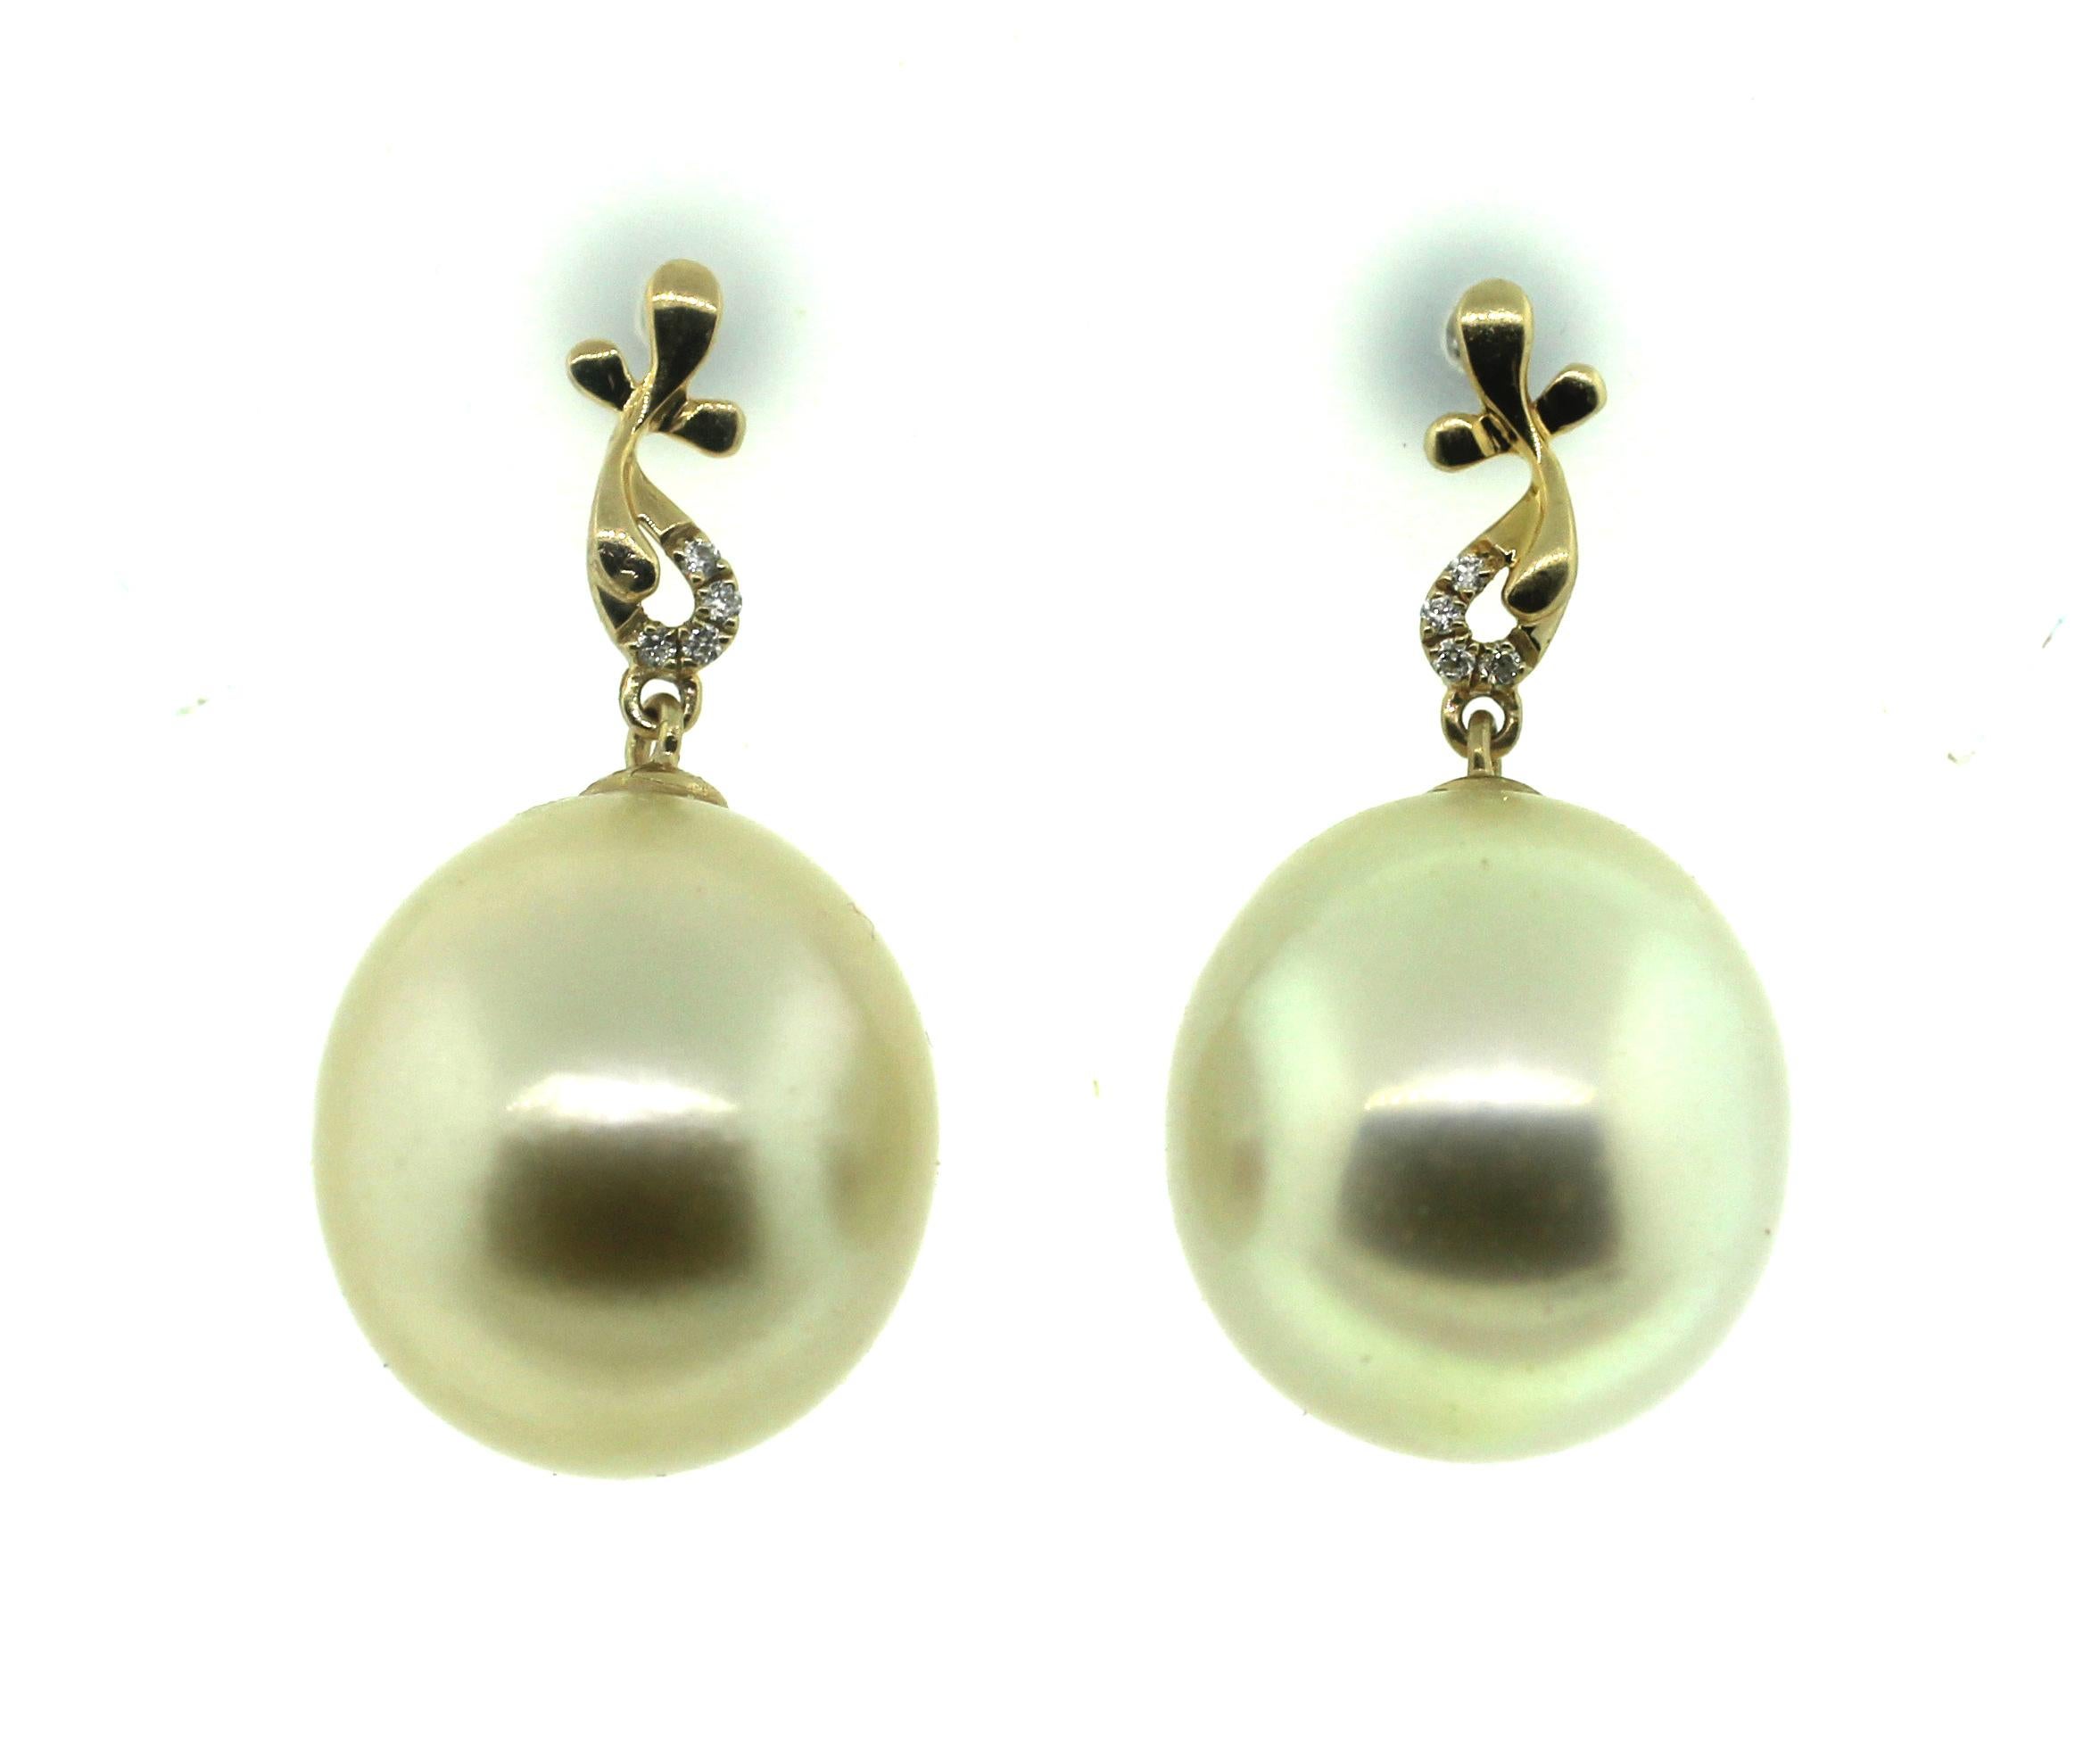 Hakimoto By Jewel Of Ocean
18K Yellow Gold With Diamonds
Natural Color Drop Cultured Pearl Earrings.
Total item weight 9.2 grams
15x13.5 mm Natural color South Sea Drop Cultured Pearls
18K Yellow Gold High Polish
Orient: Very Good
Luster: Very